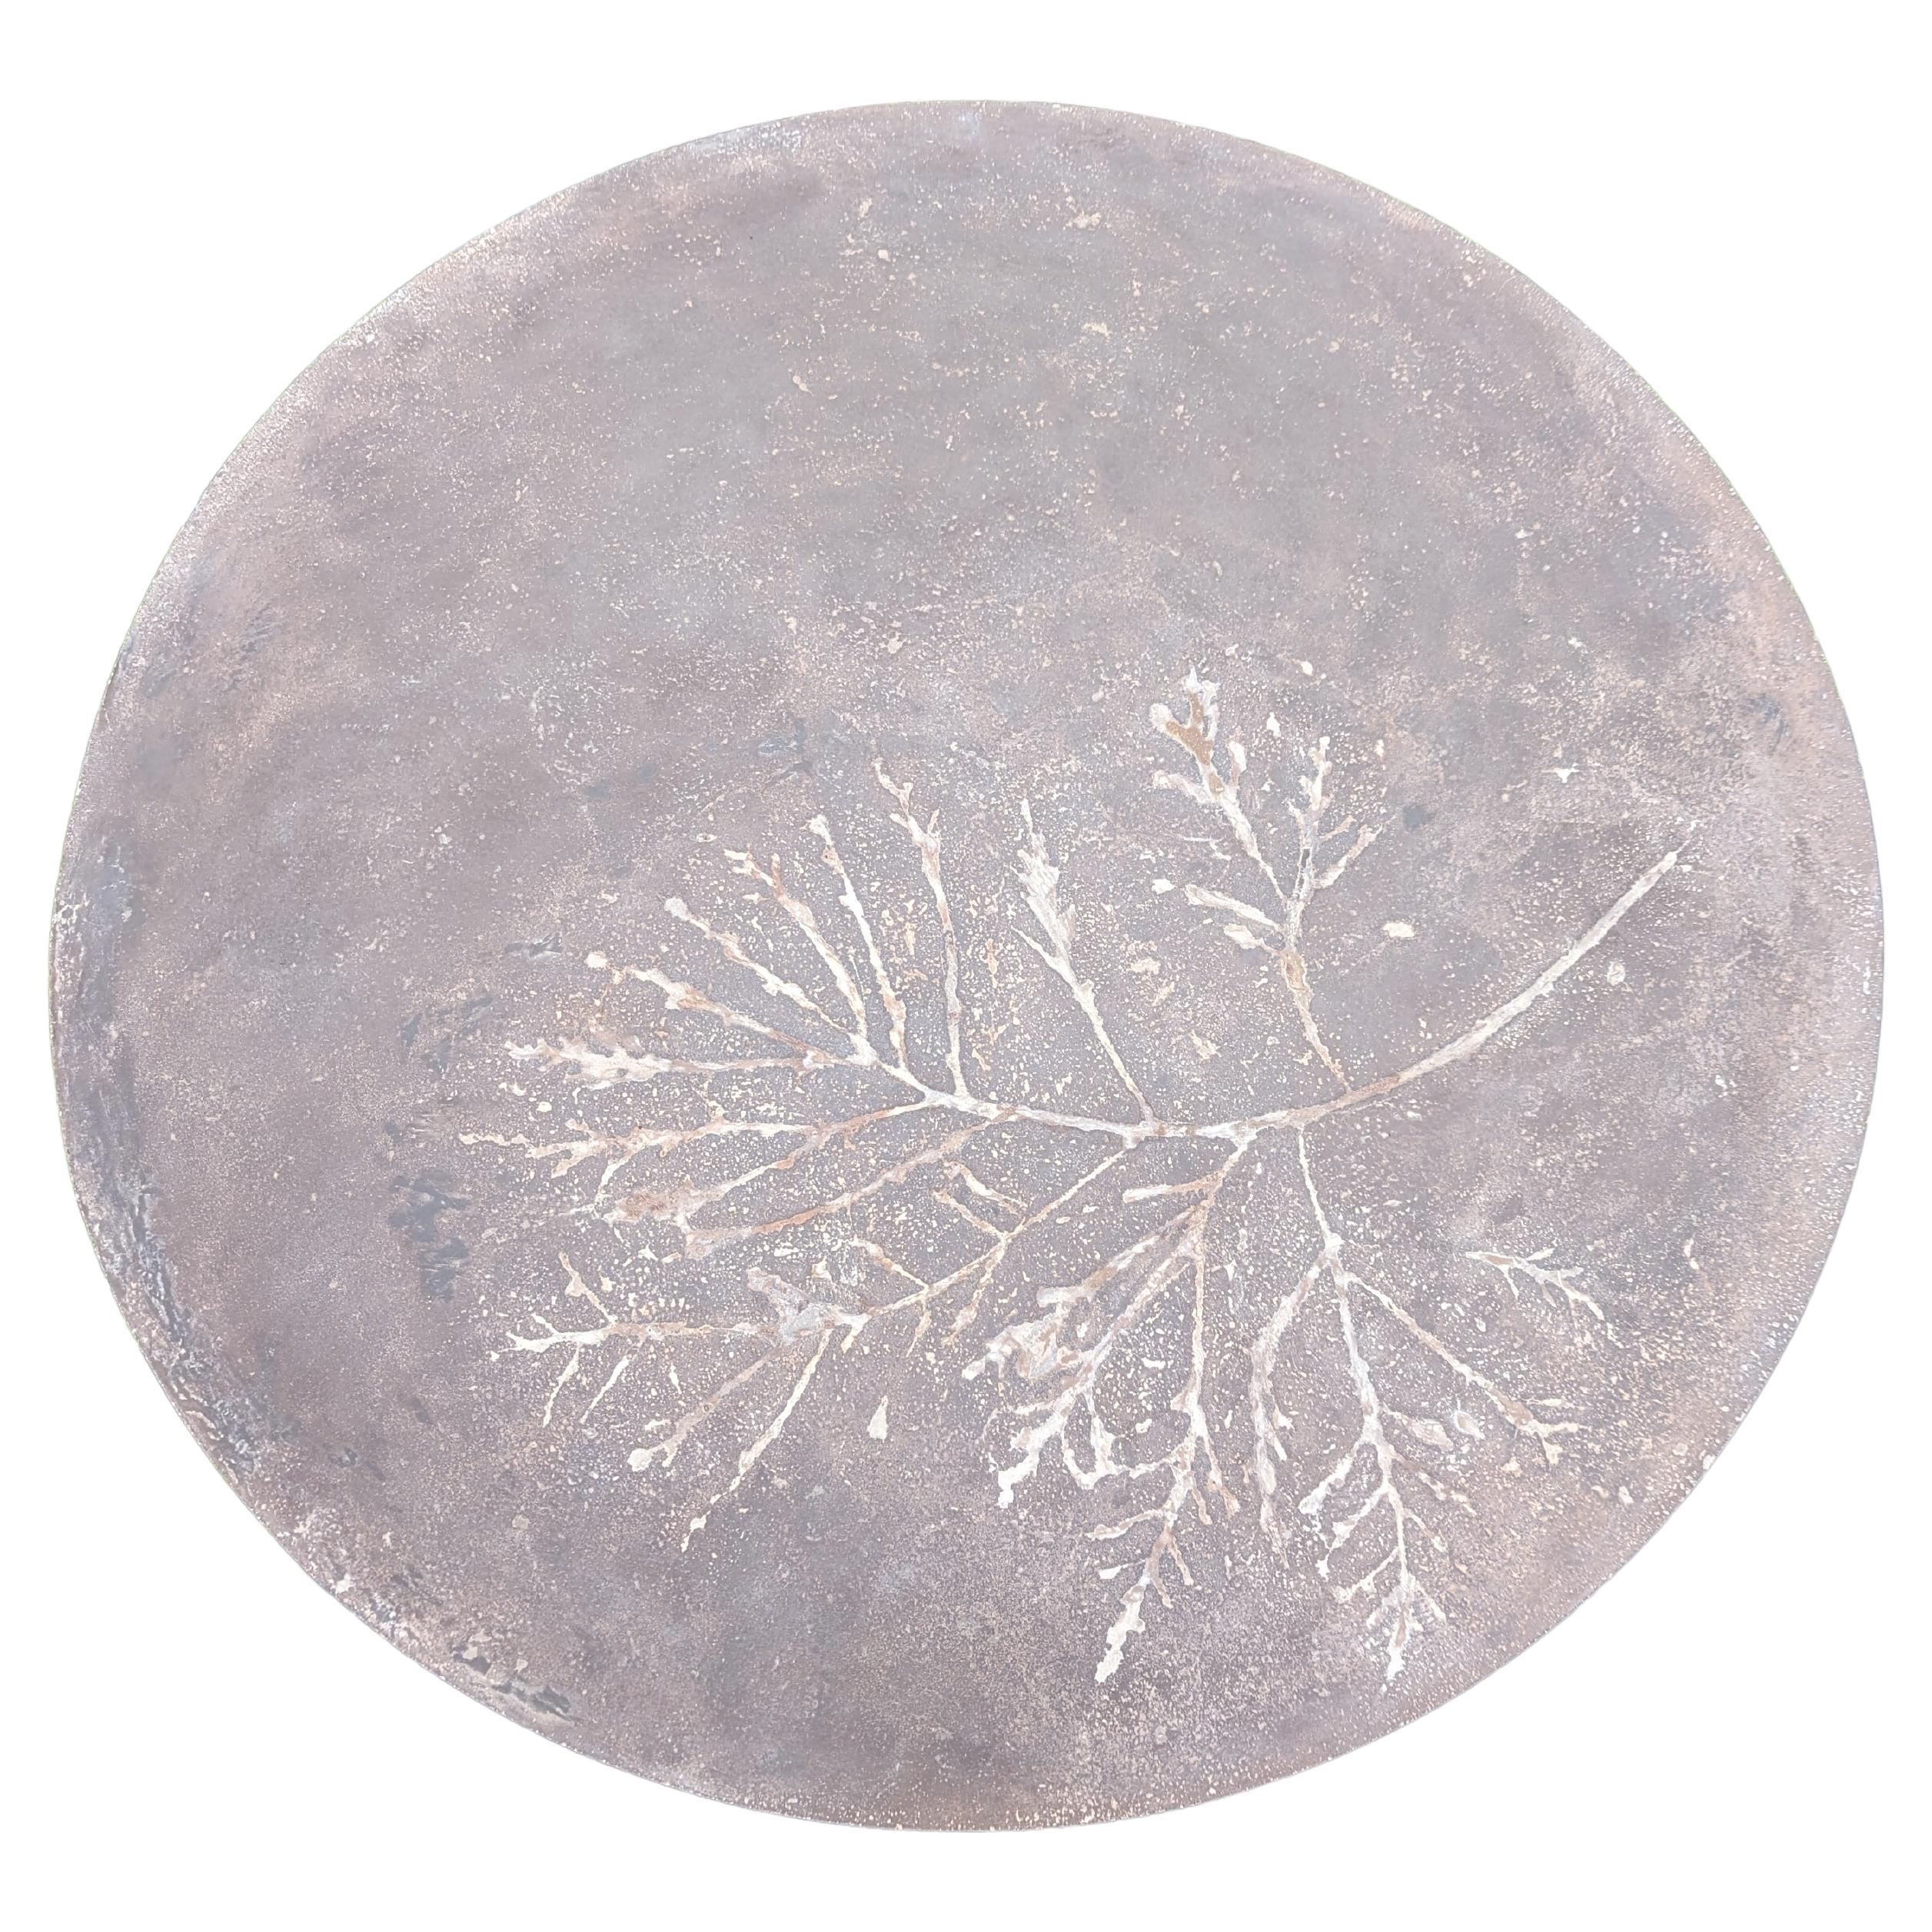 These highly customizable mid-weight round concrete dining or coffee table tops with or without impressions from real leaves can make a natural addition to nearly any room or outdoor environment. Bases are not included, and only provided for